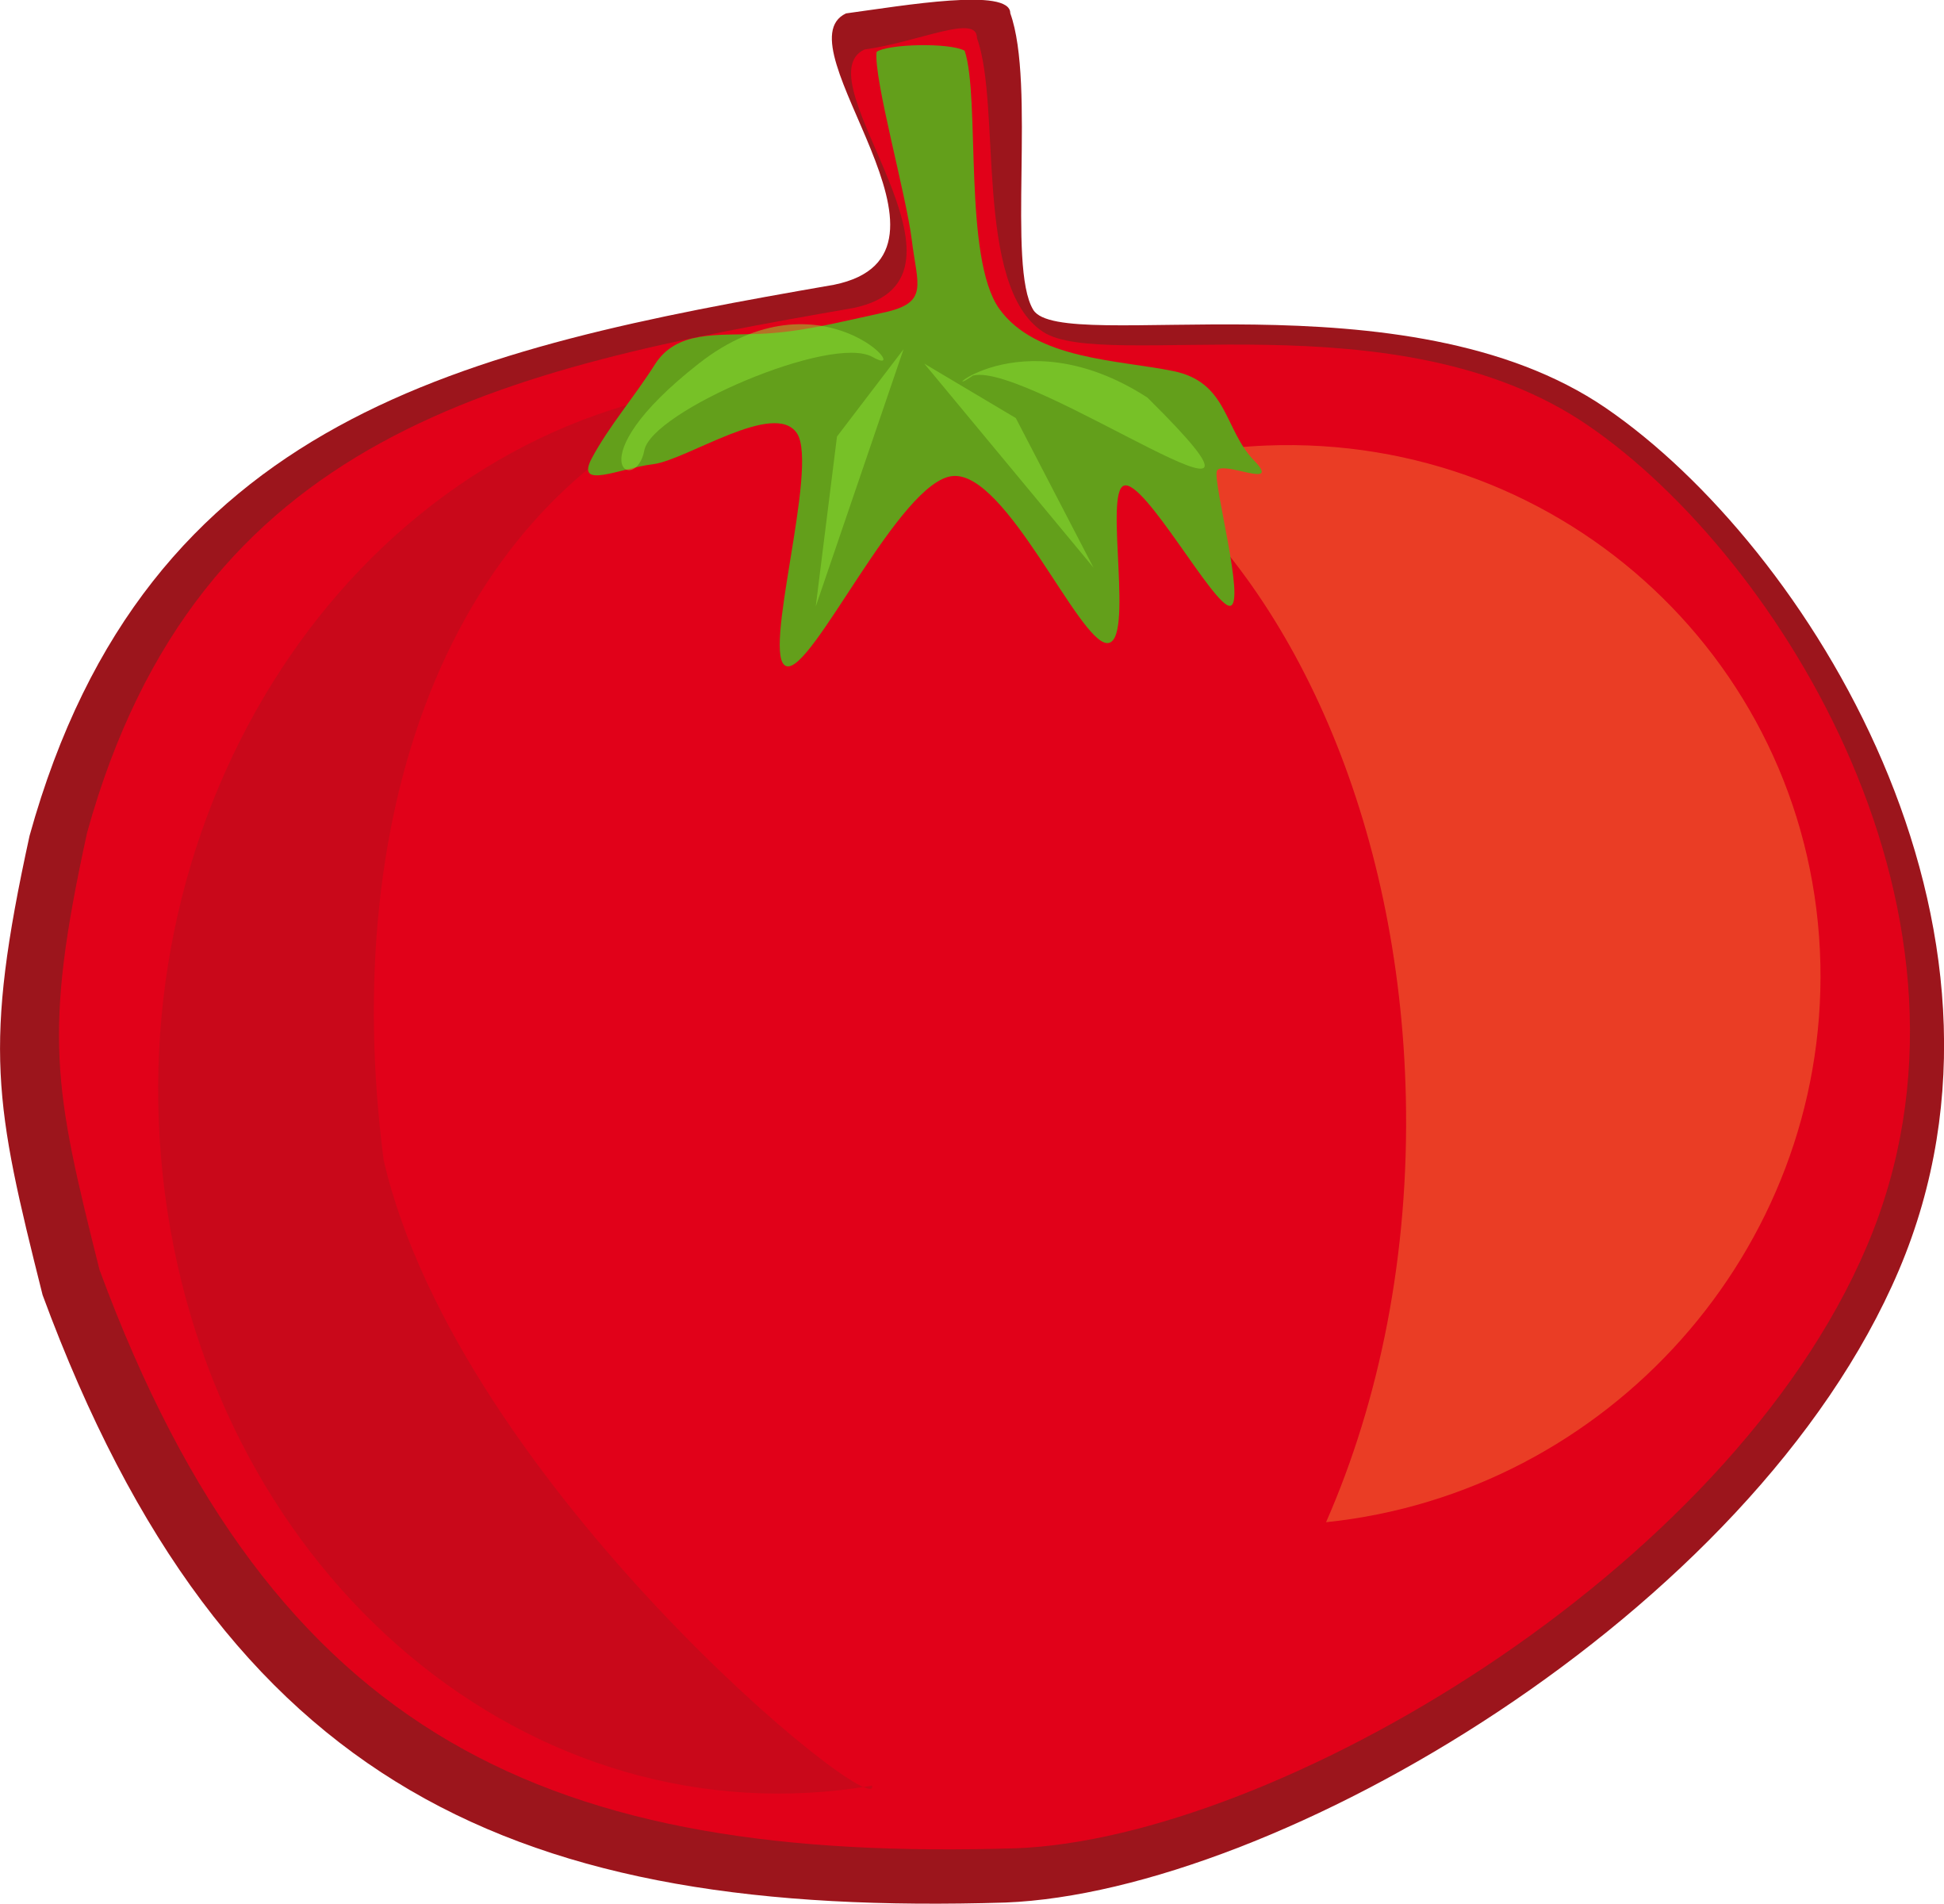 Vegetables set big image. Tomatoes clipart carrot